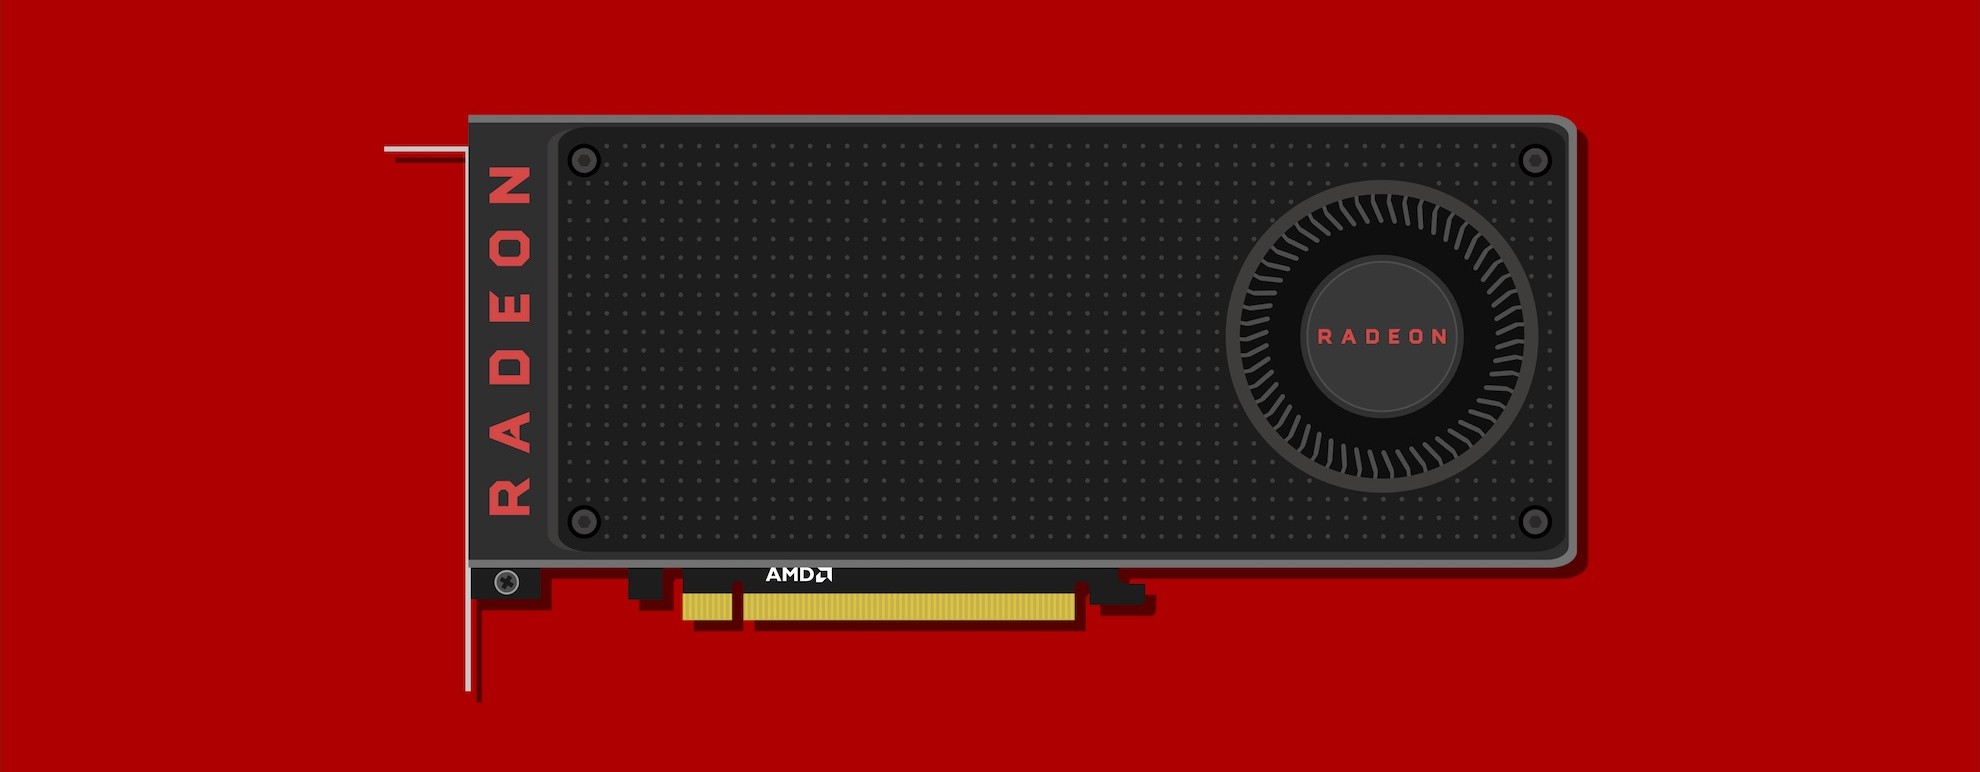 Rumour: Radeon RX 490 To Come At The 